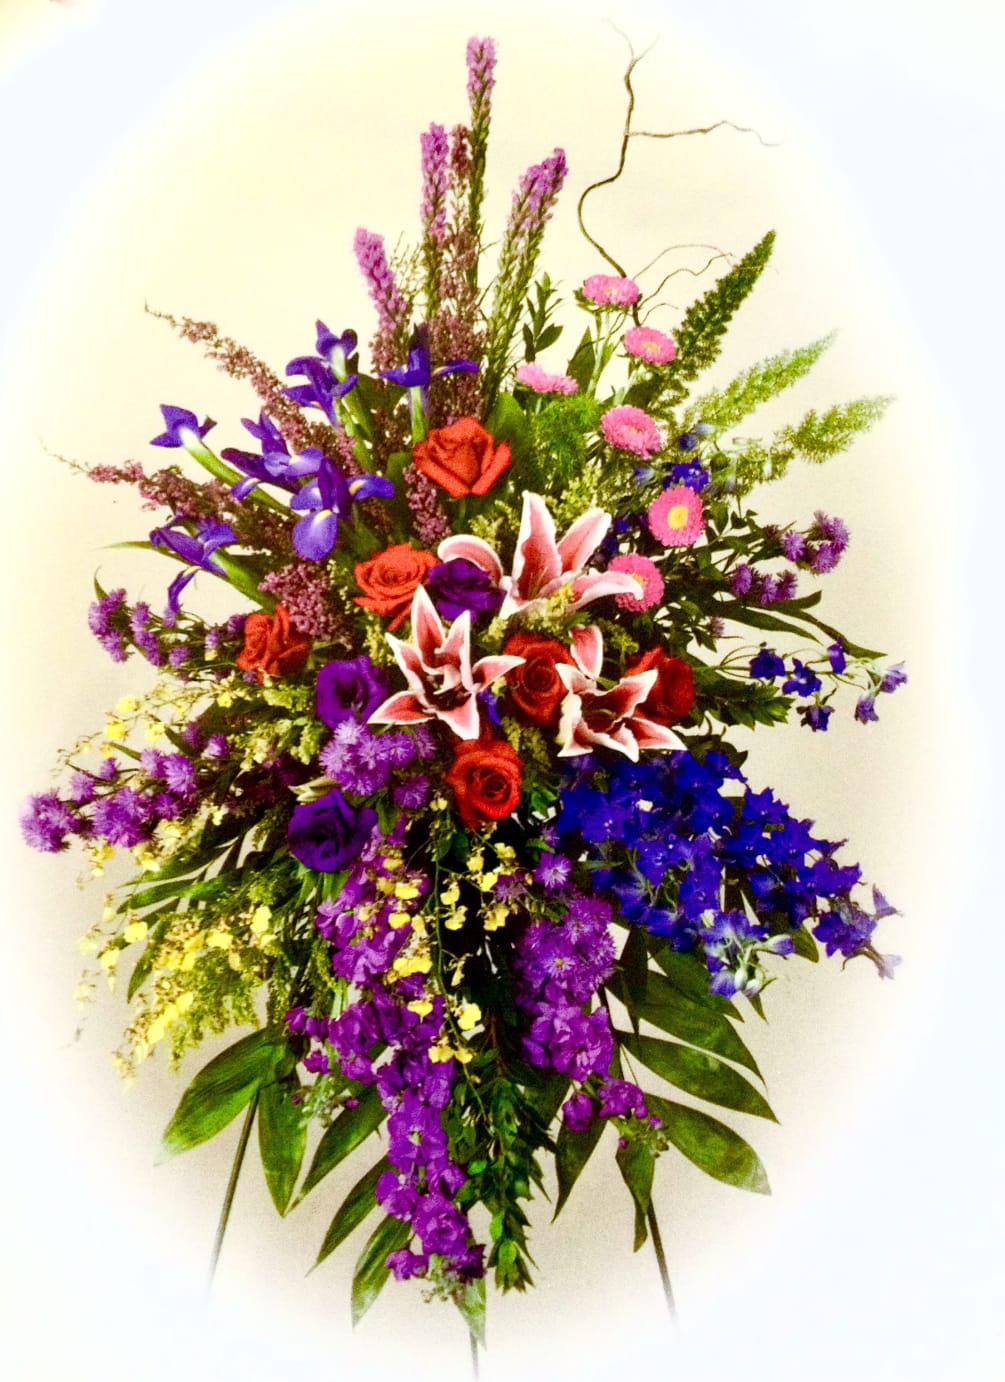 A large display of garden flowers in vibrant colors, arranged in a